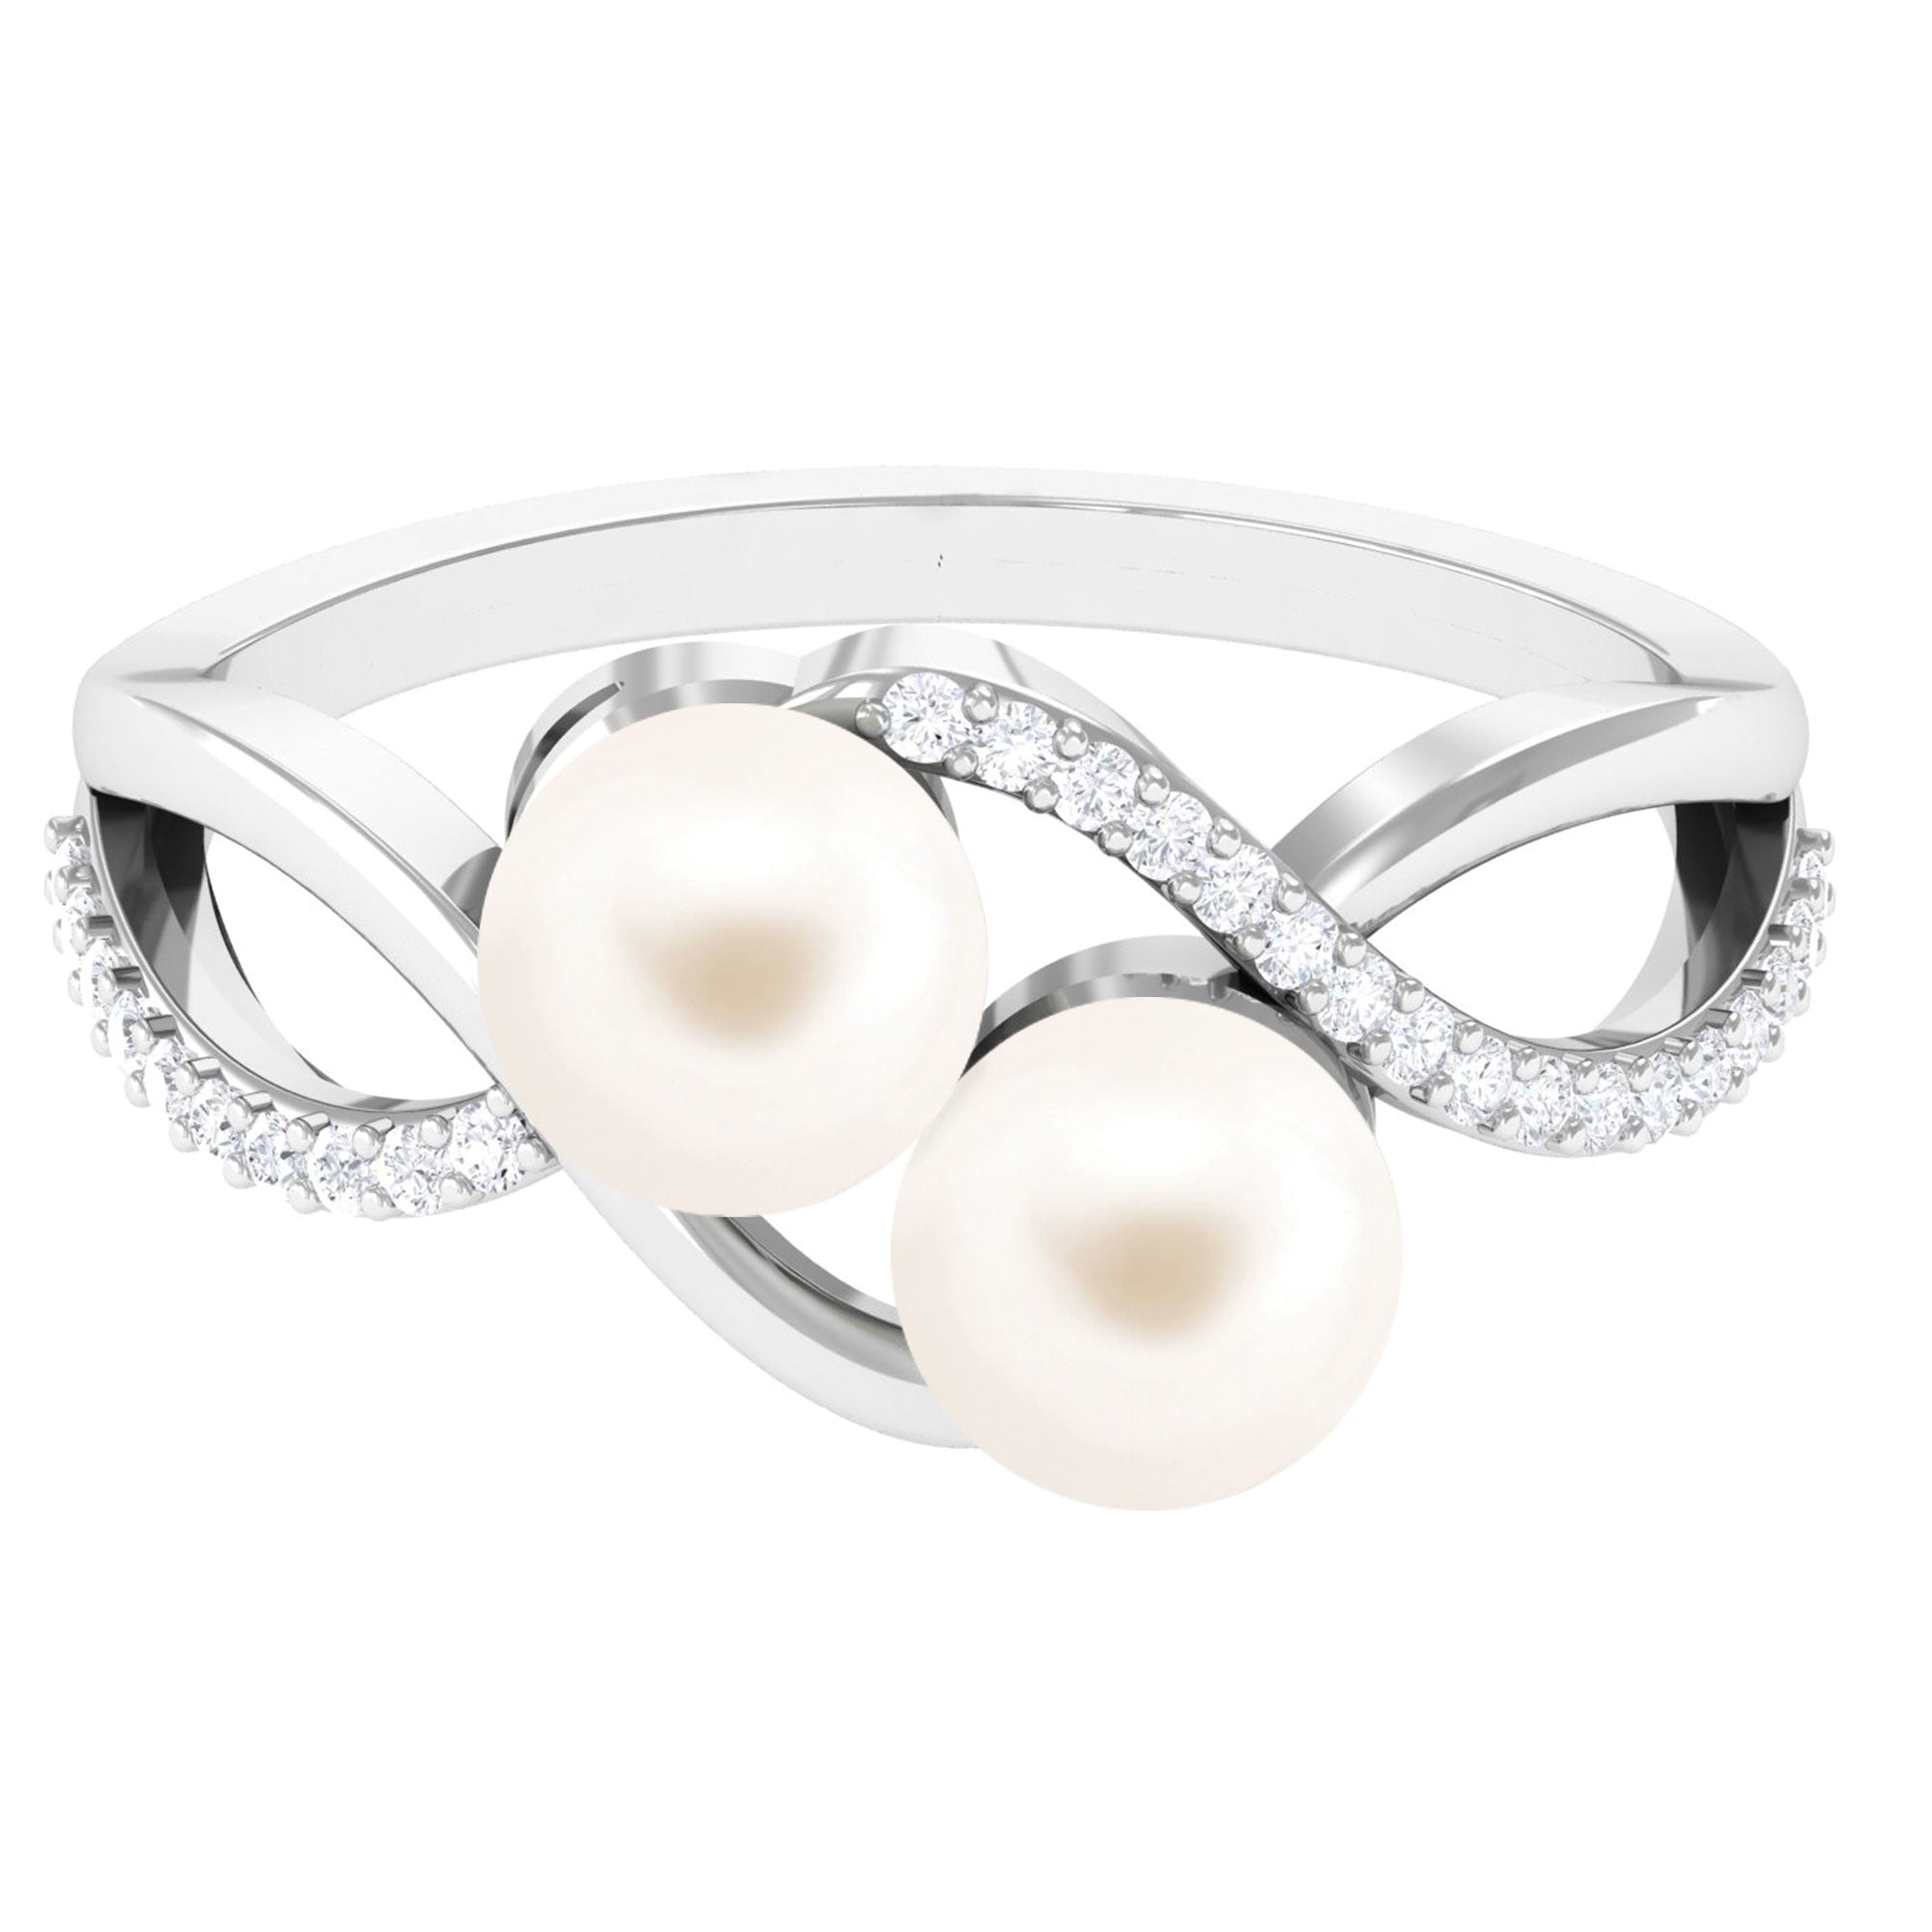 White Freshwater Pearl Two Stone Ring with Diamond Accent Freshwater Pearl-AAA Quality - Arisha Jewels